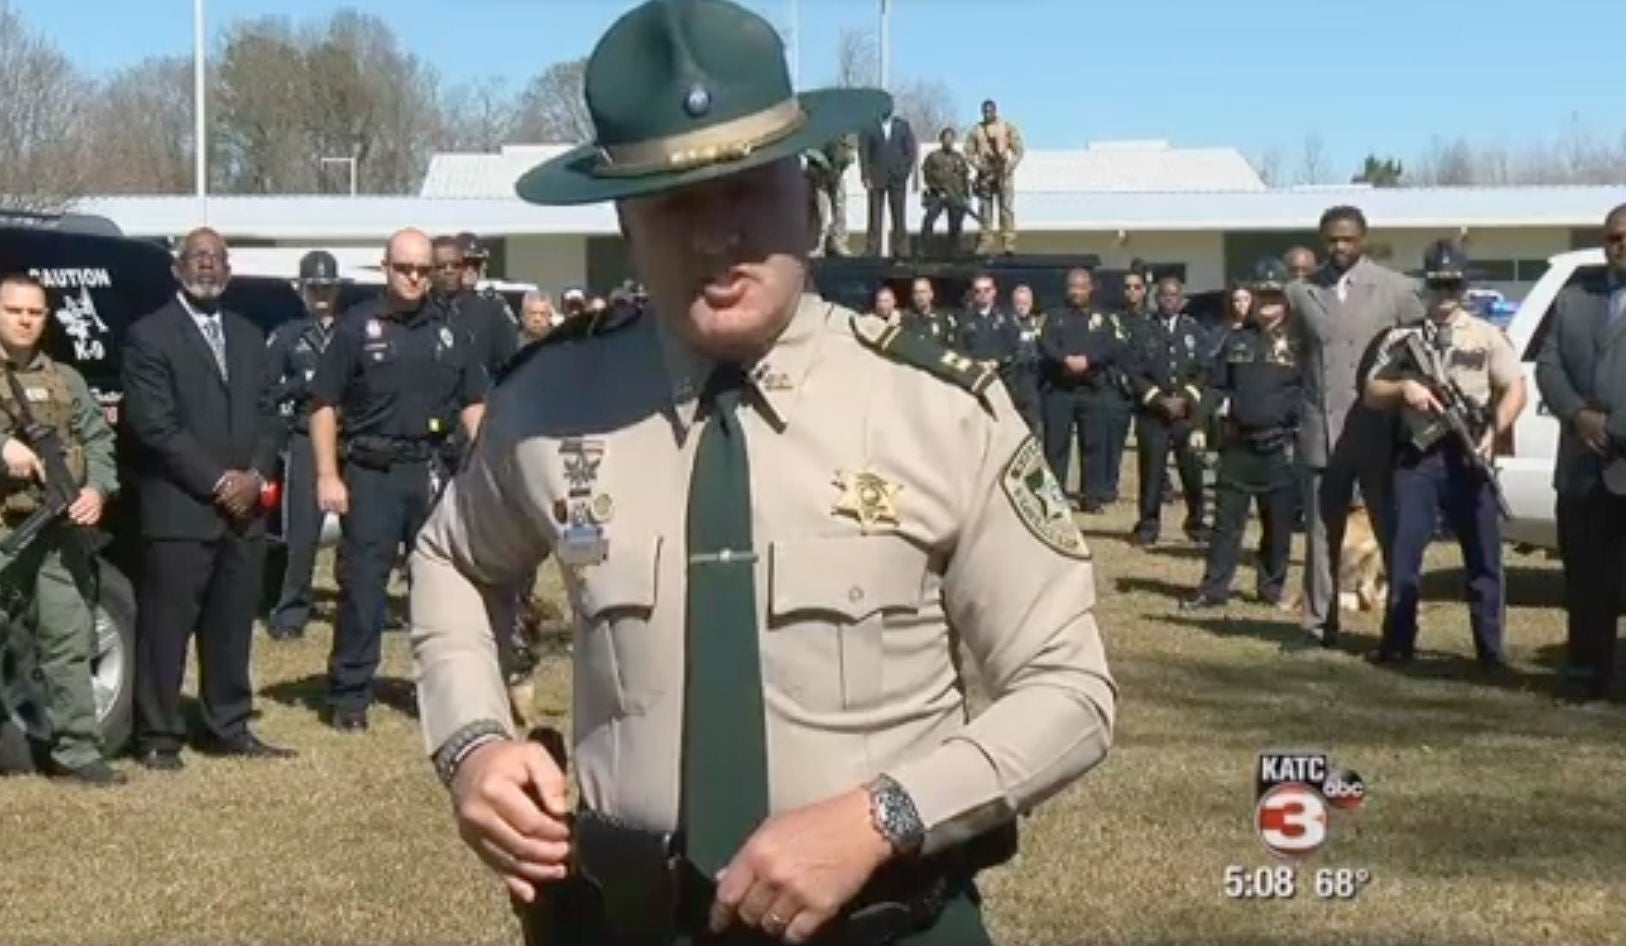 Clay Higgins said: 'This is not about race, this is about right versus wrong'